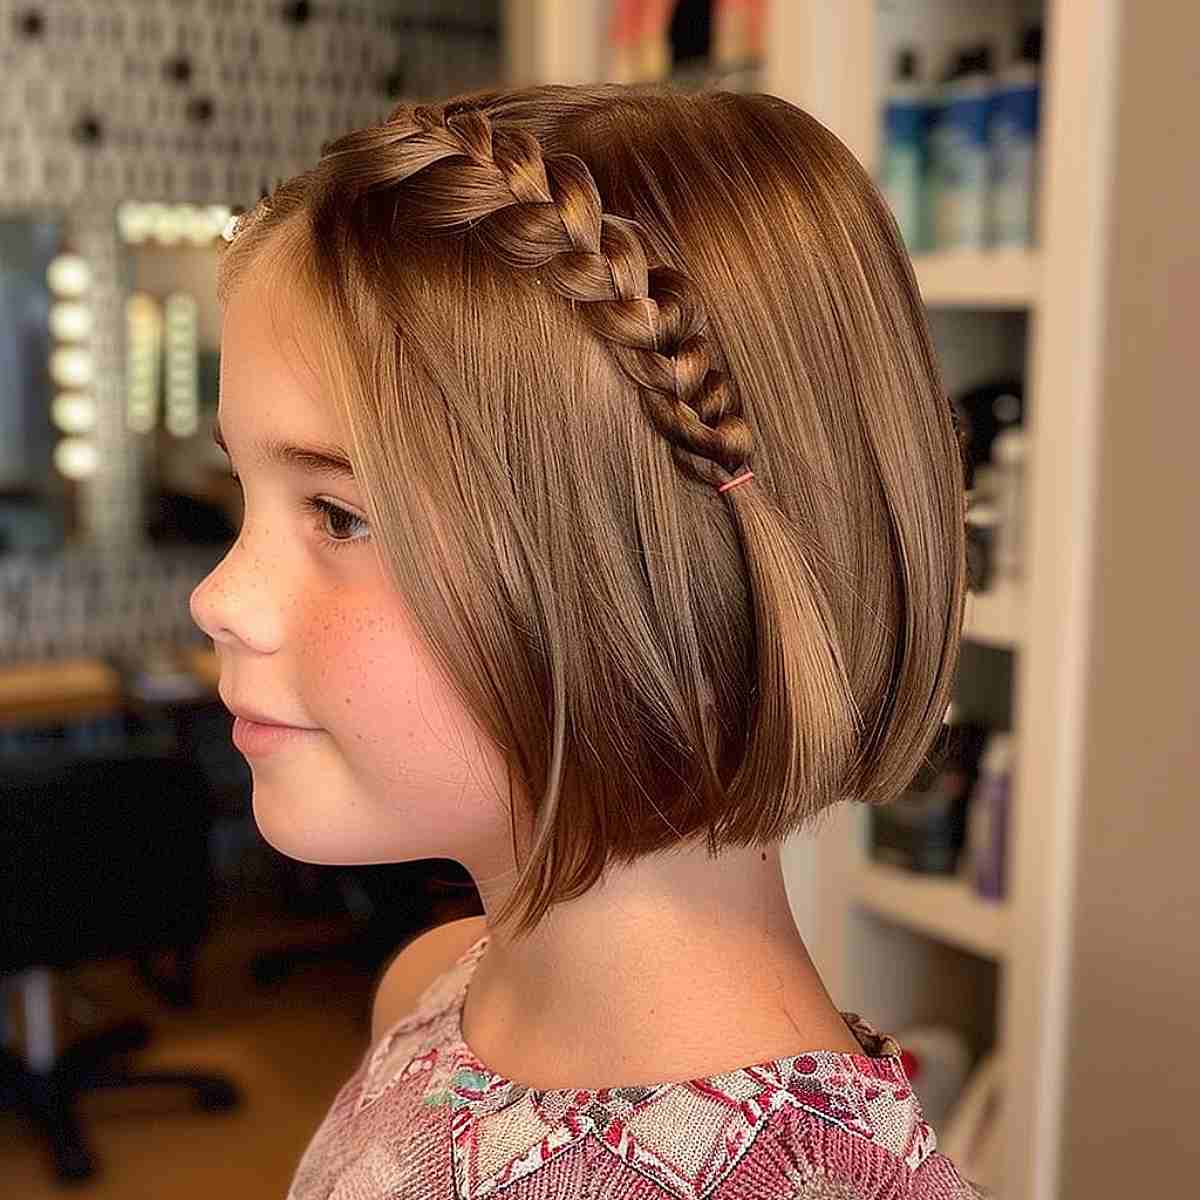 20 Adorable Long Hair Hairstyles For Girls - Playtivities